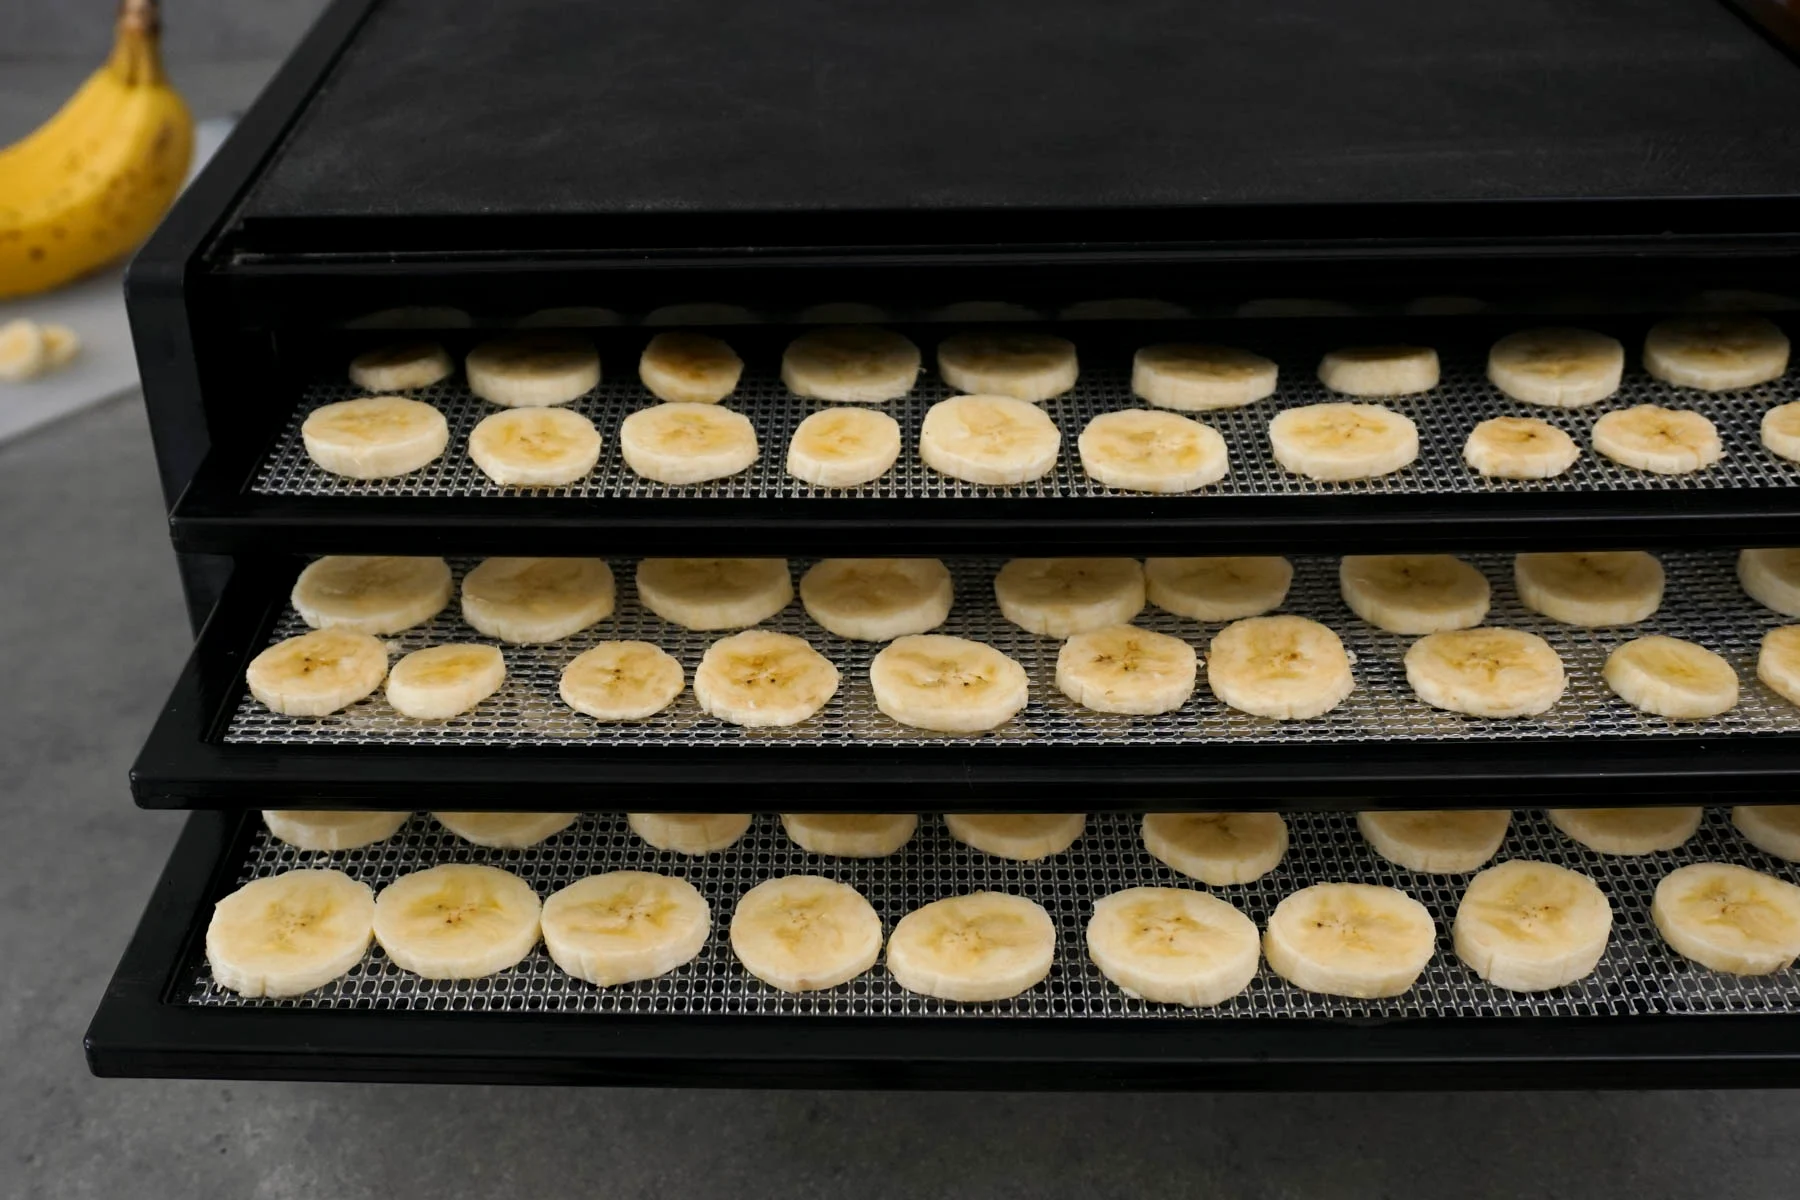 How To Make Banana Chips With A Dehydrator